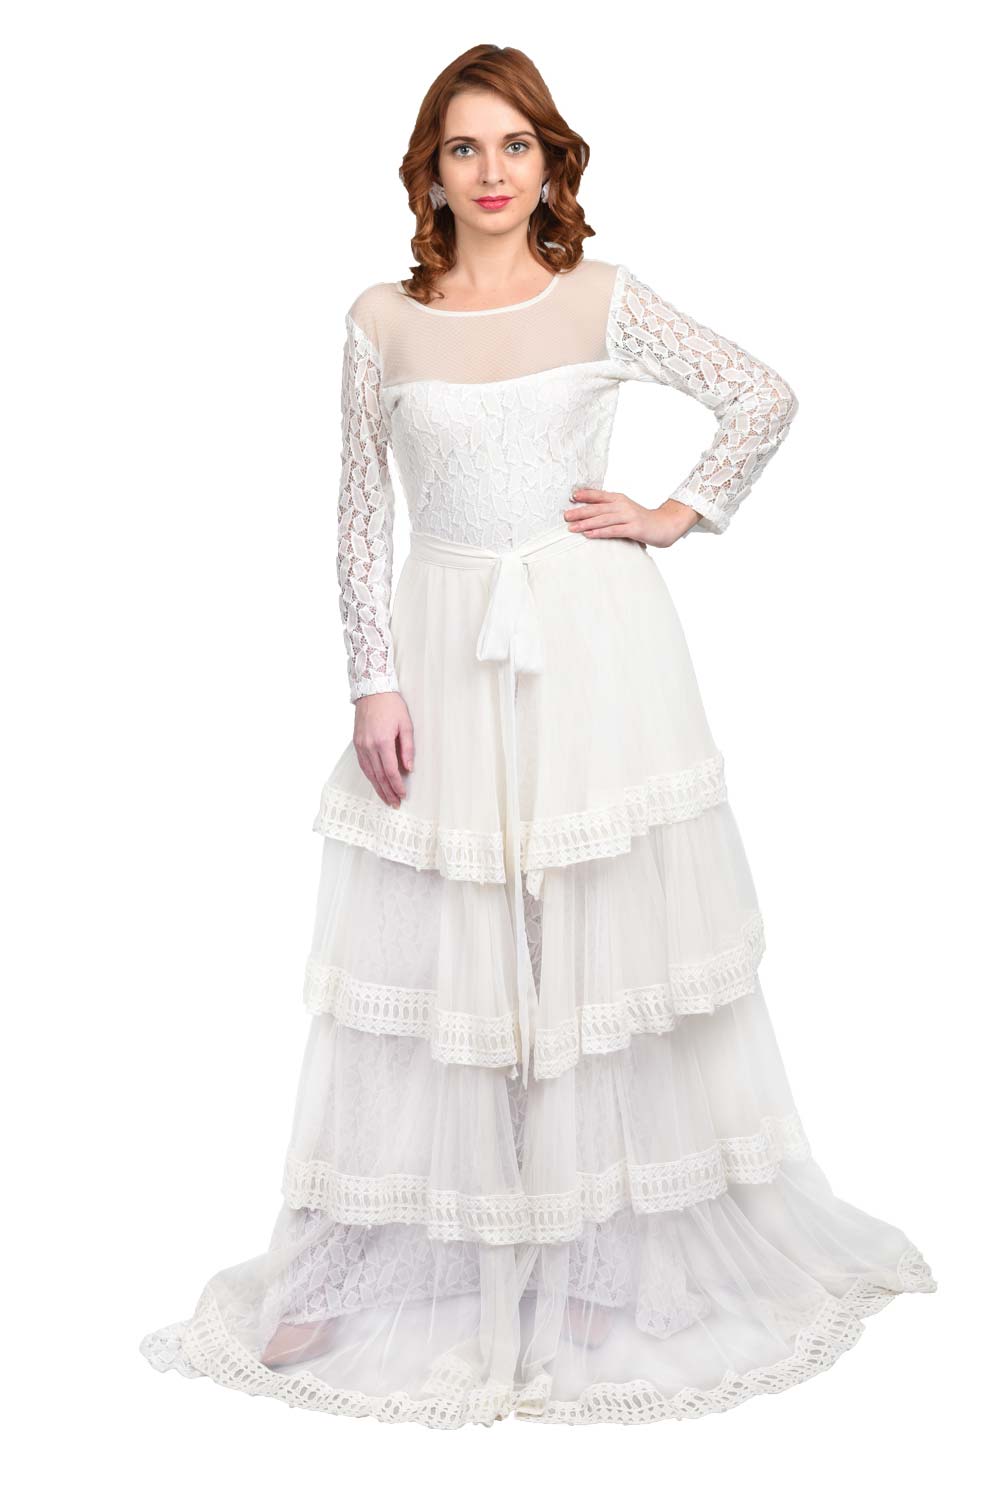 Udanchu White Gown Dress with wrap around Tule skirt